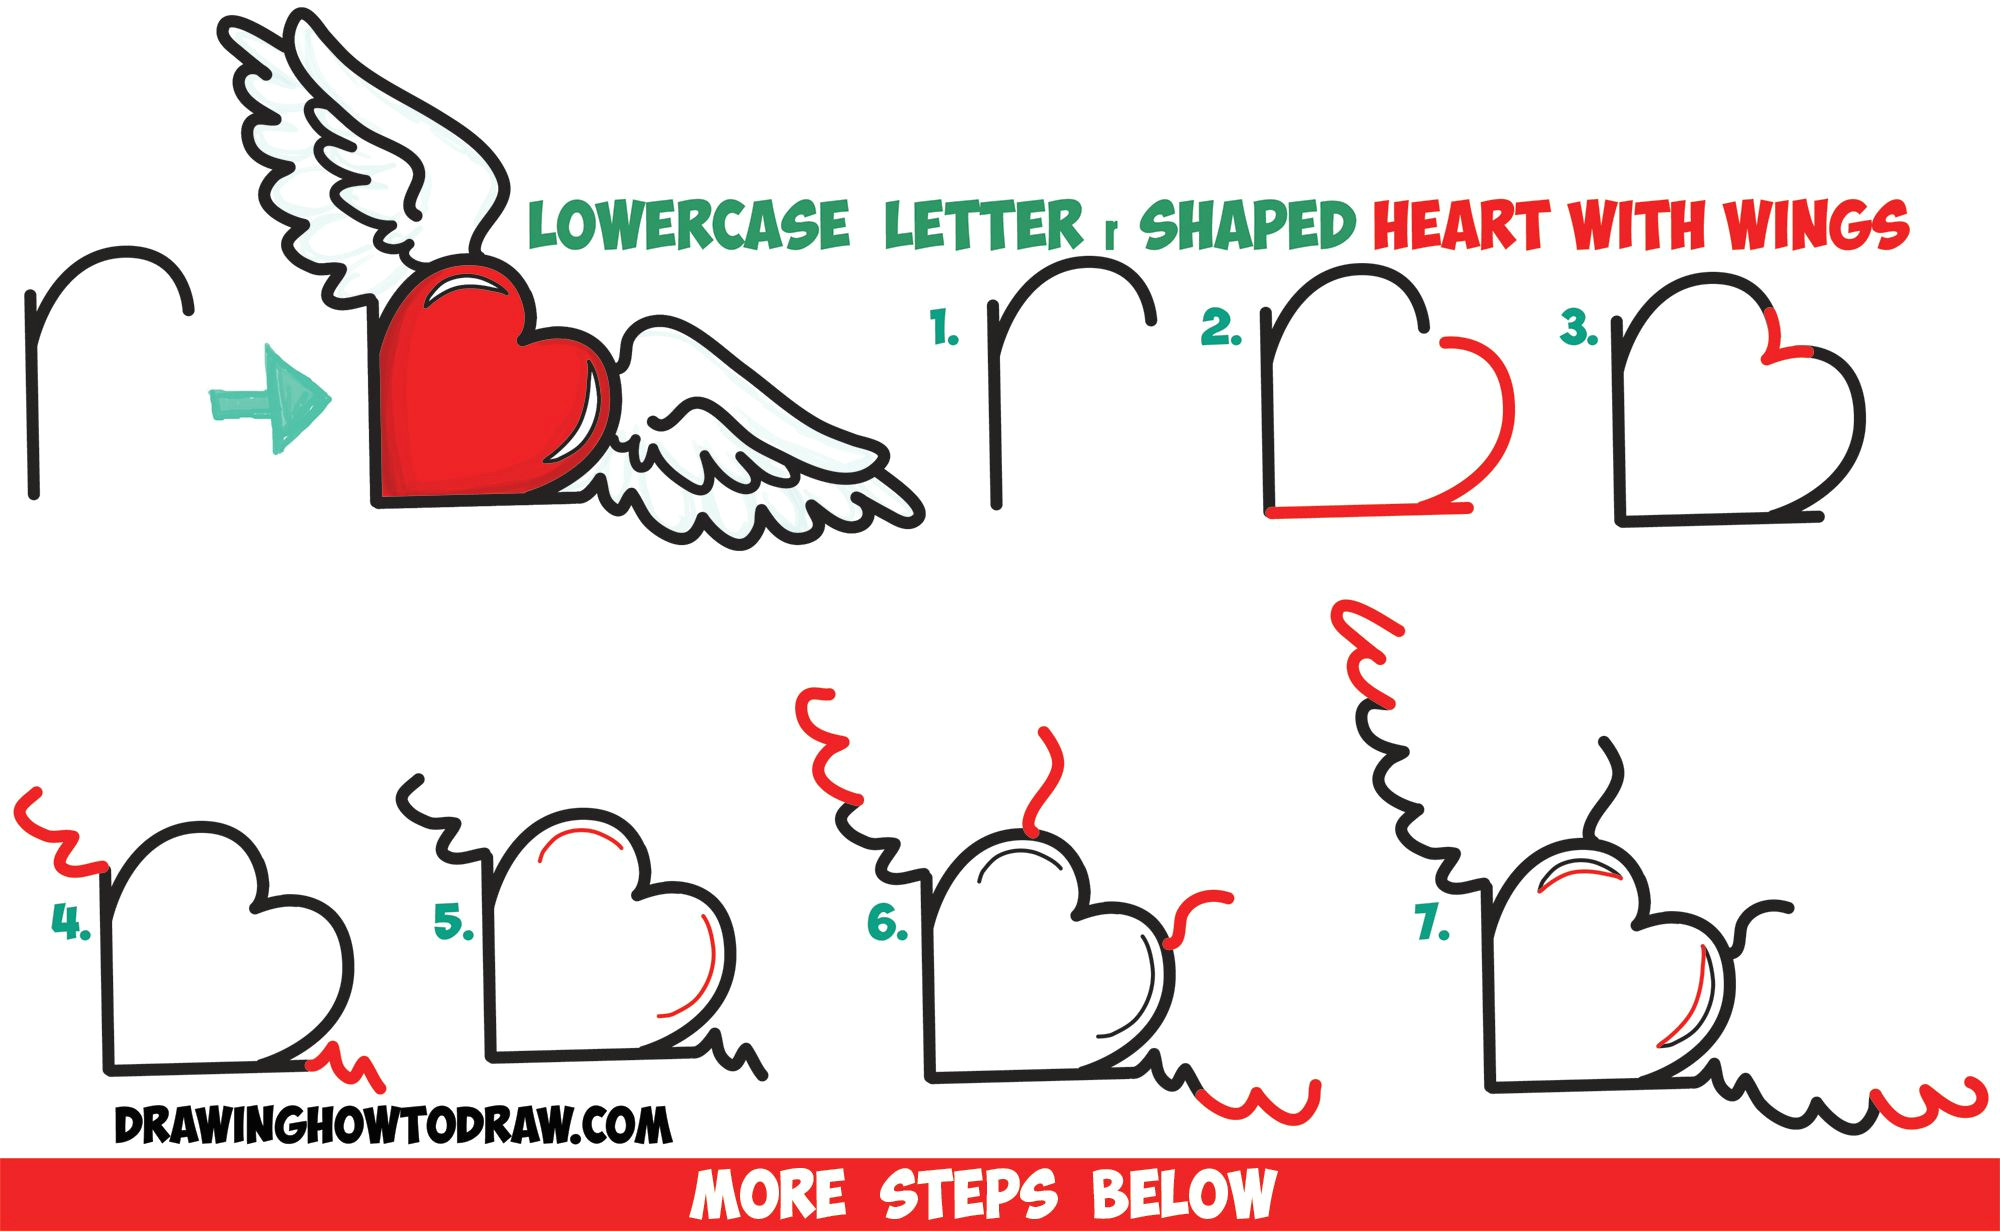 Drawing Ng Heart How to Draw Heart with Wings From Lowercase Letter R Shapes Easy